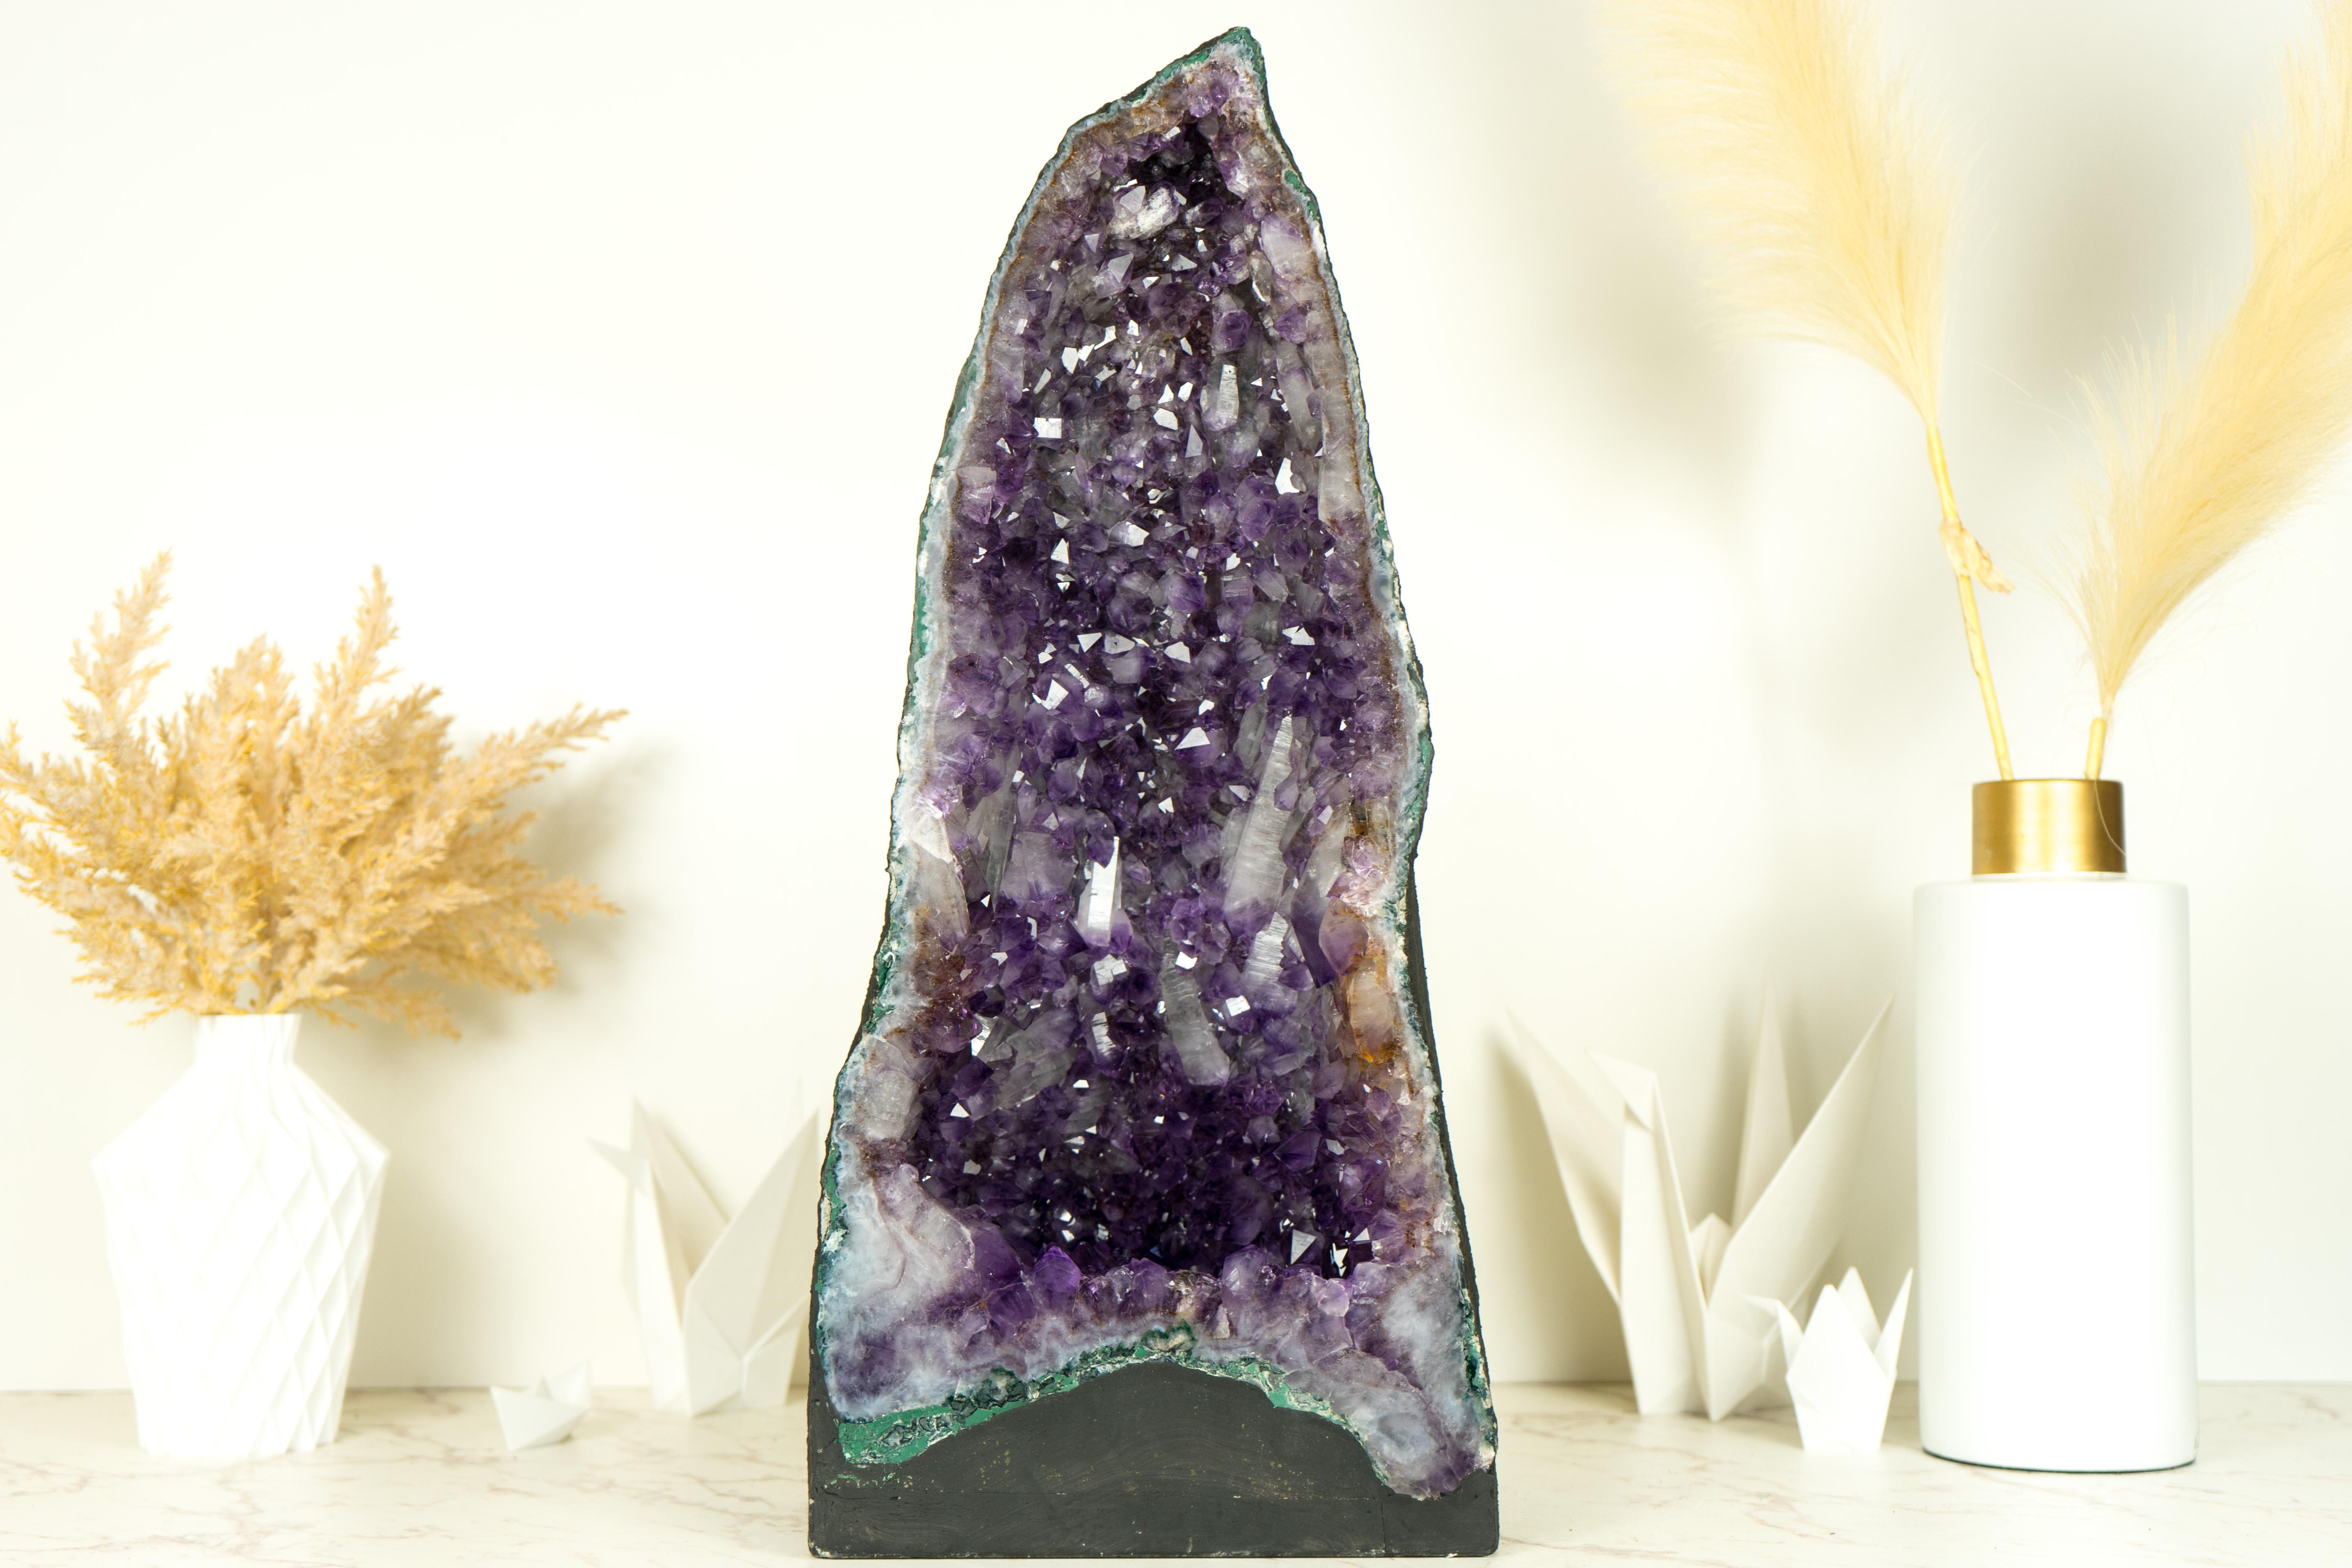 Brazilian Pair of Tall Deep Purple Amethyst Crystal Geode Cathedrals, with Rare Druzy For Sale